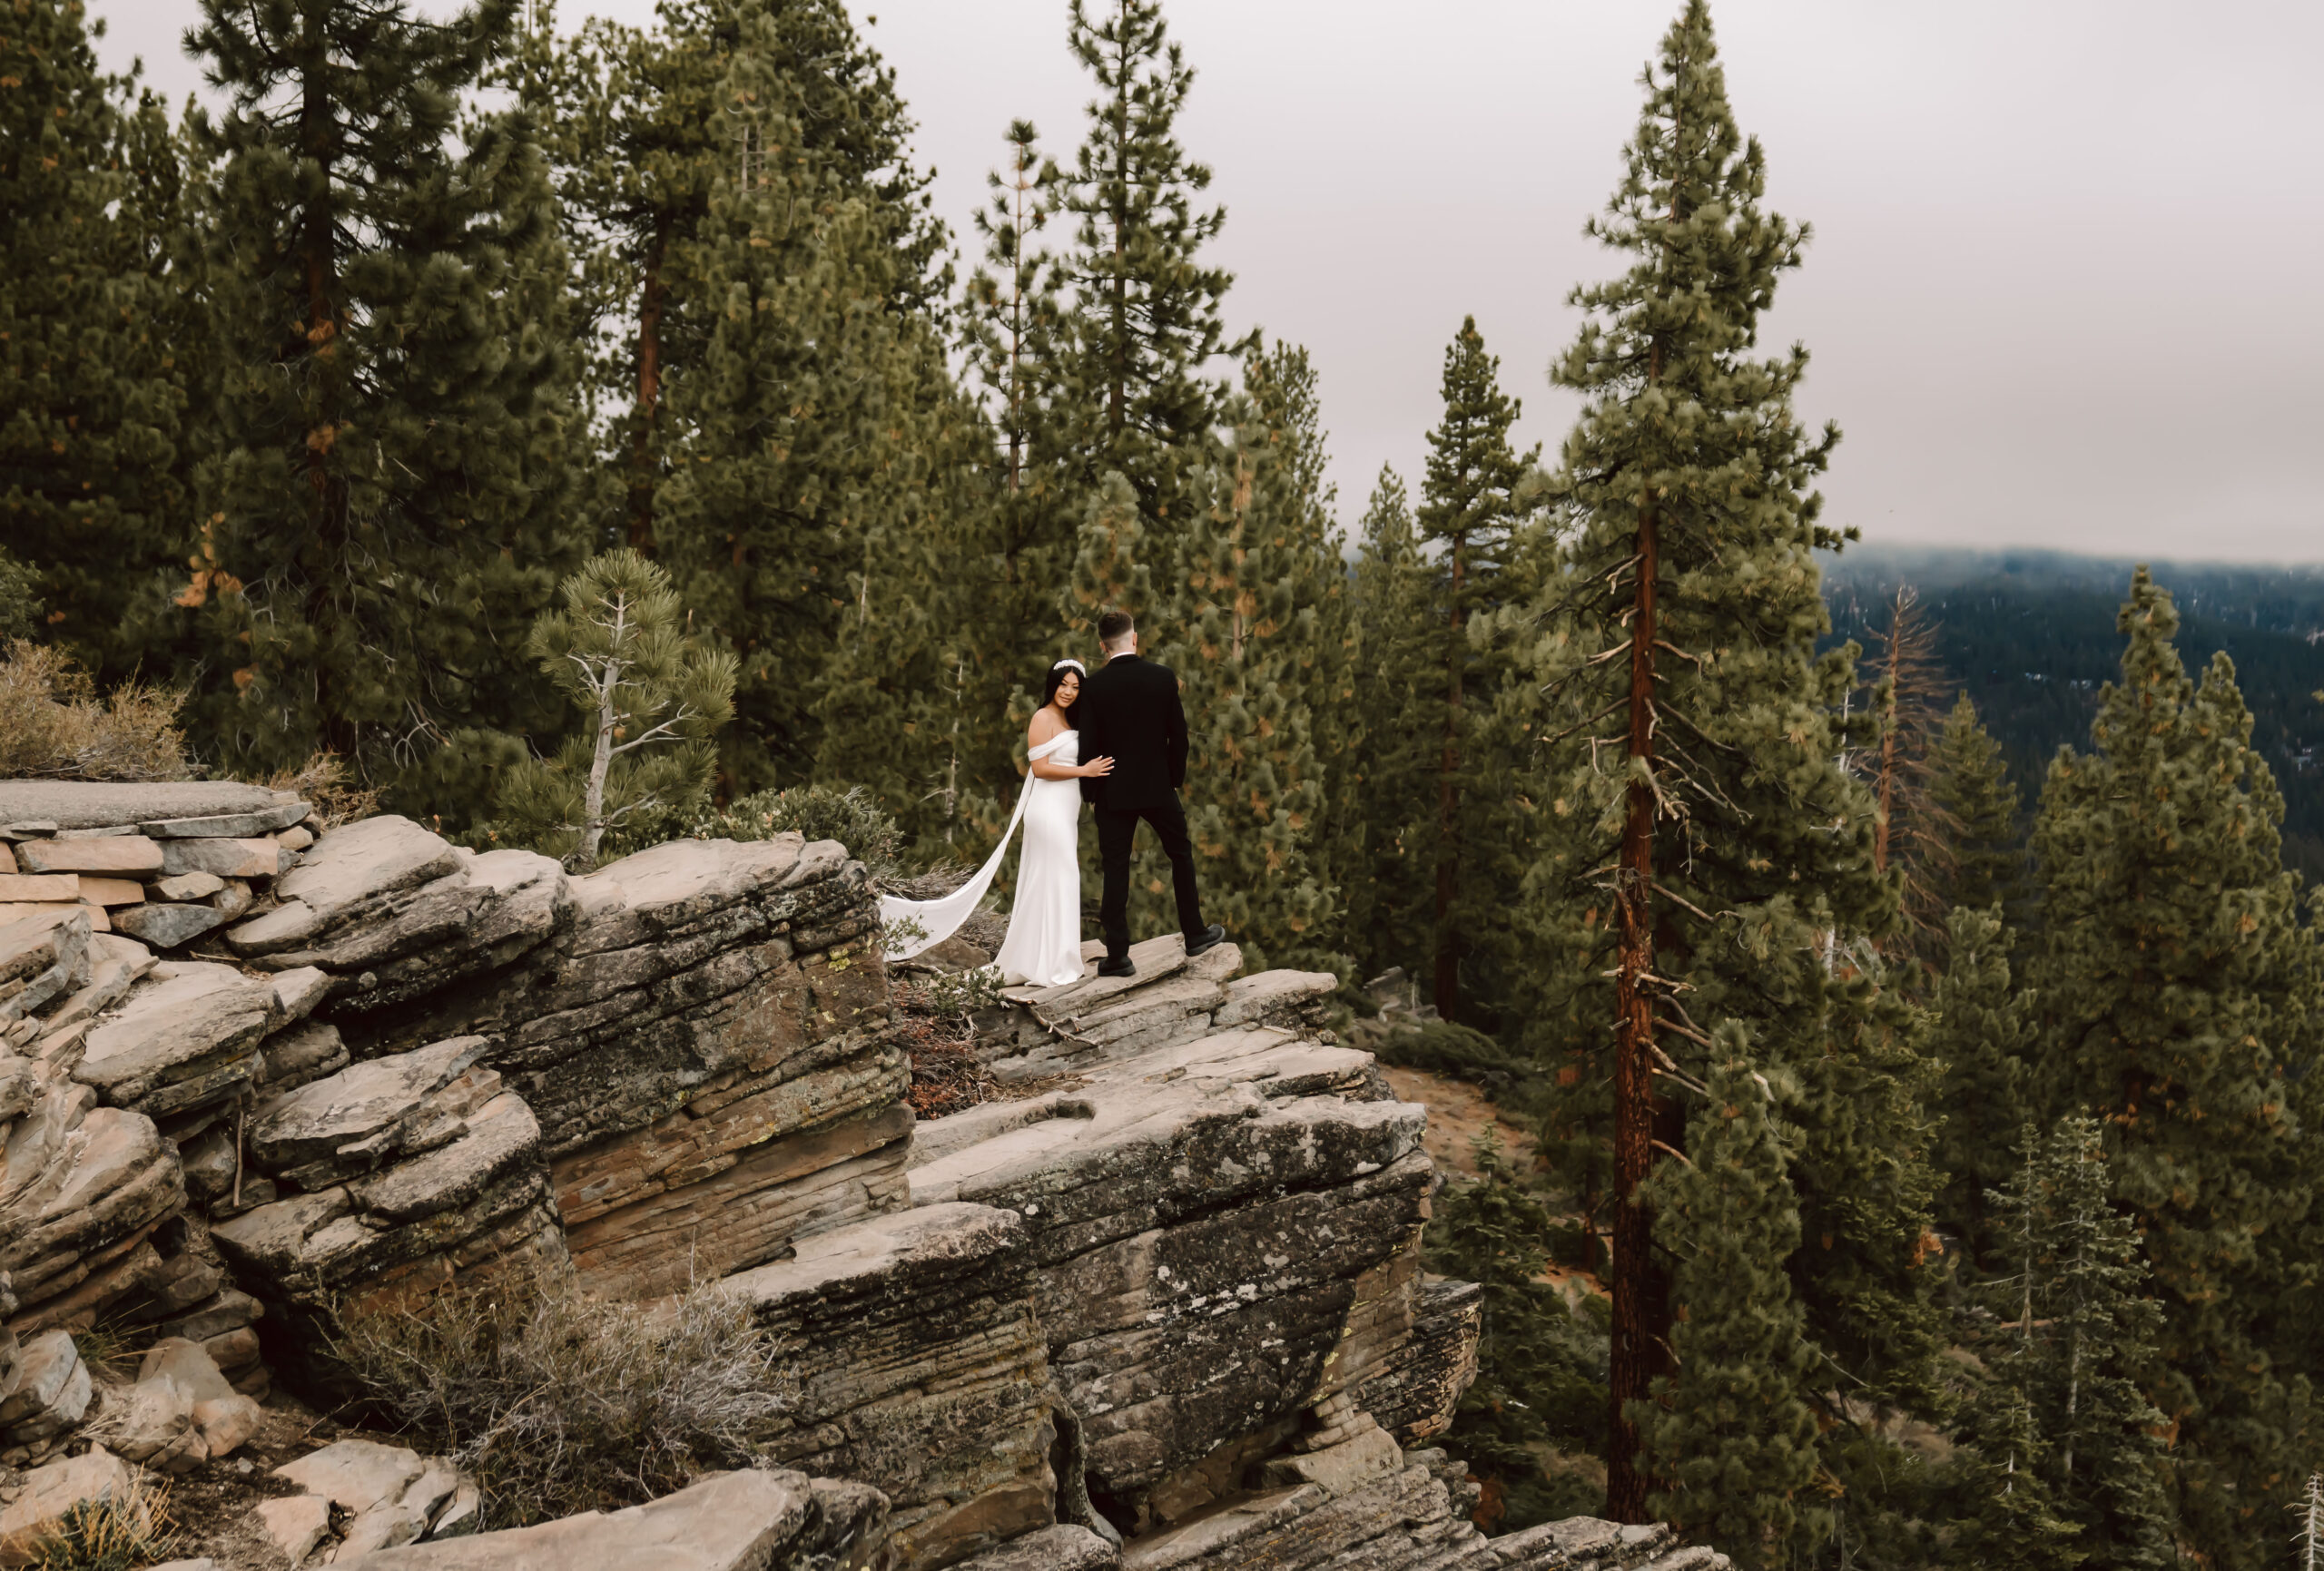 A bride and groom standing at the cliff overlooking the mountains on their Elopement day